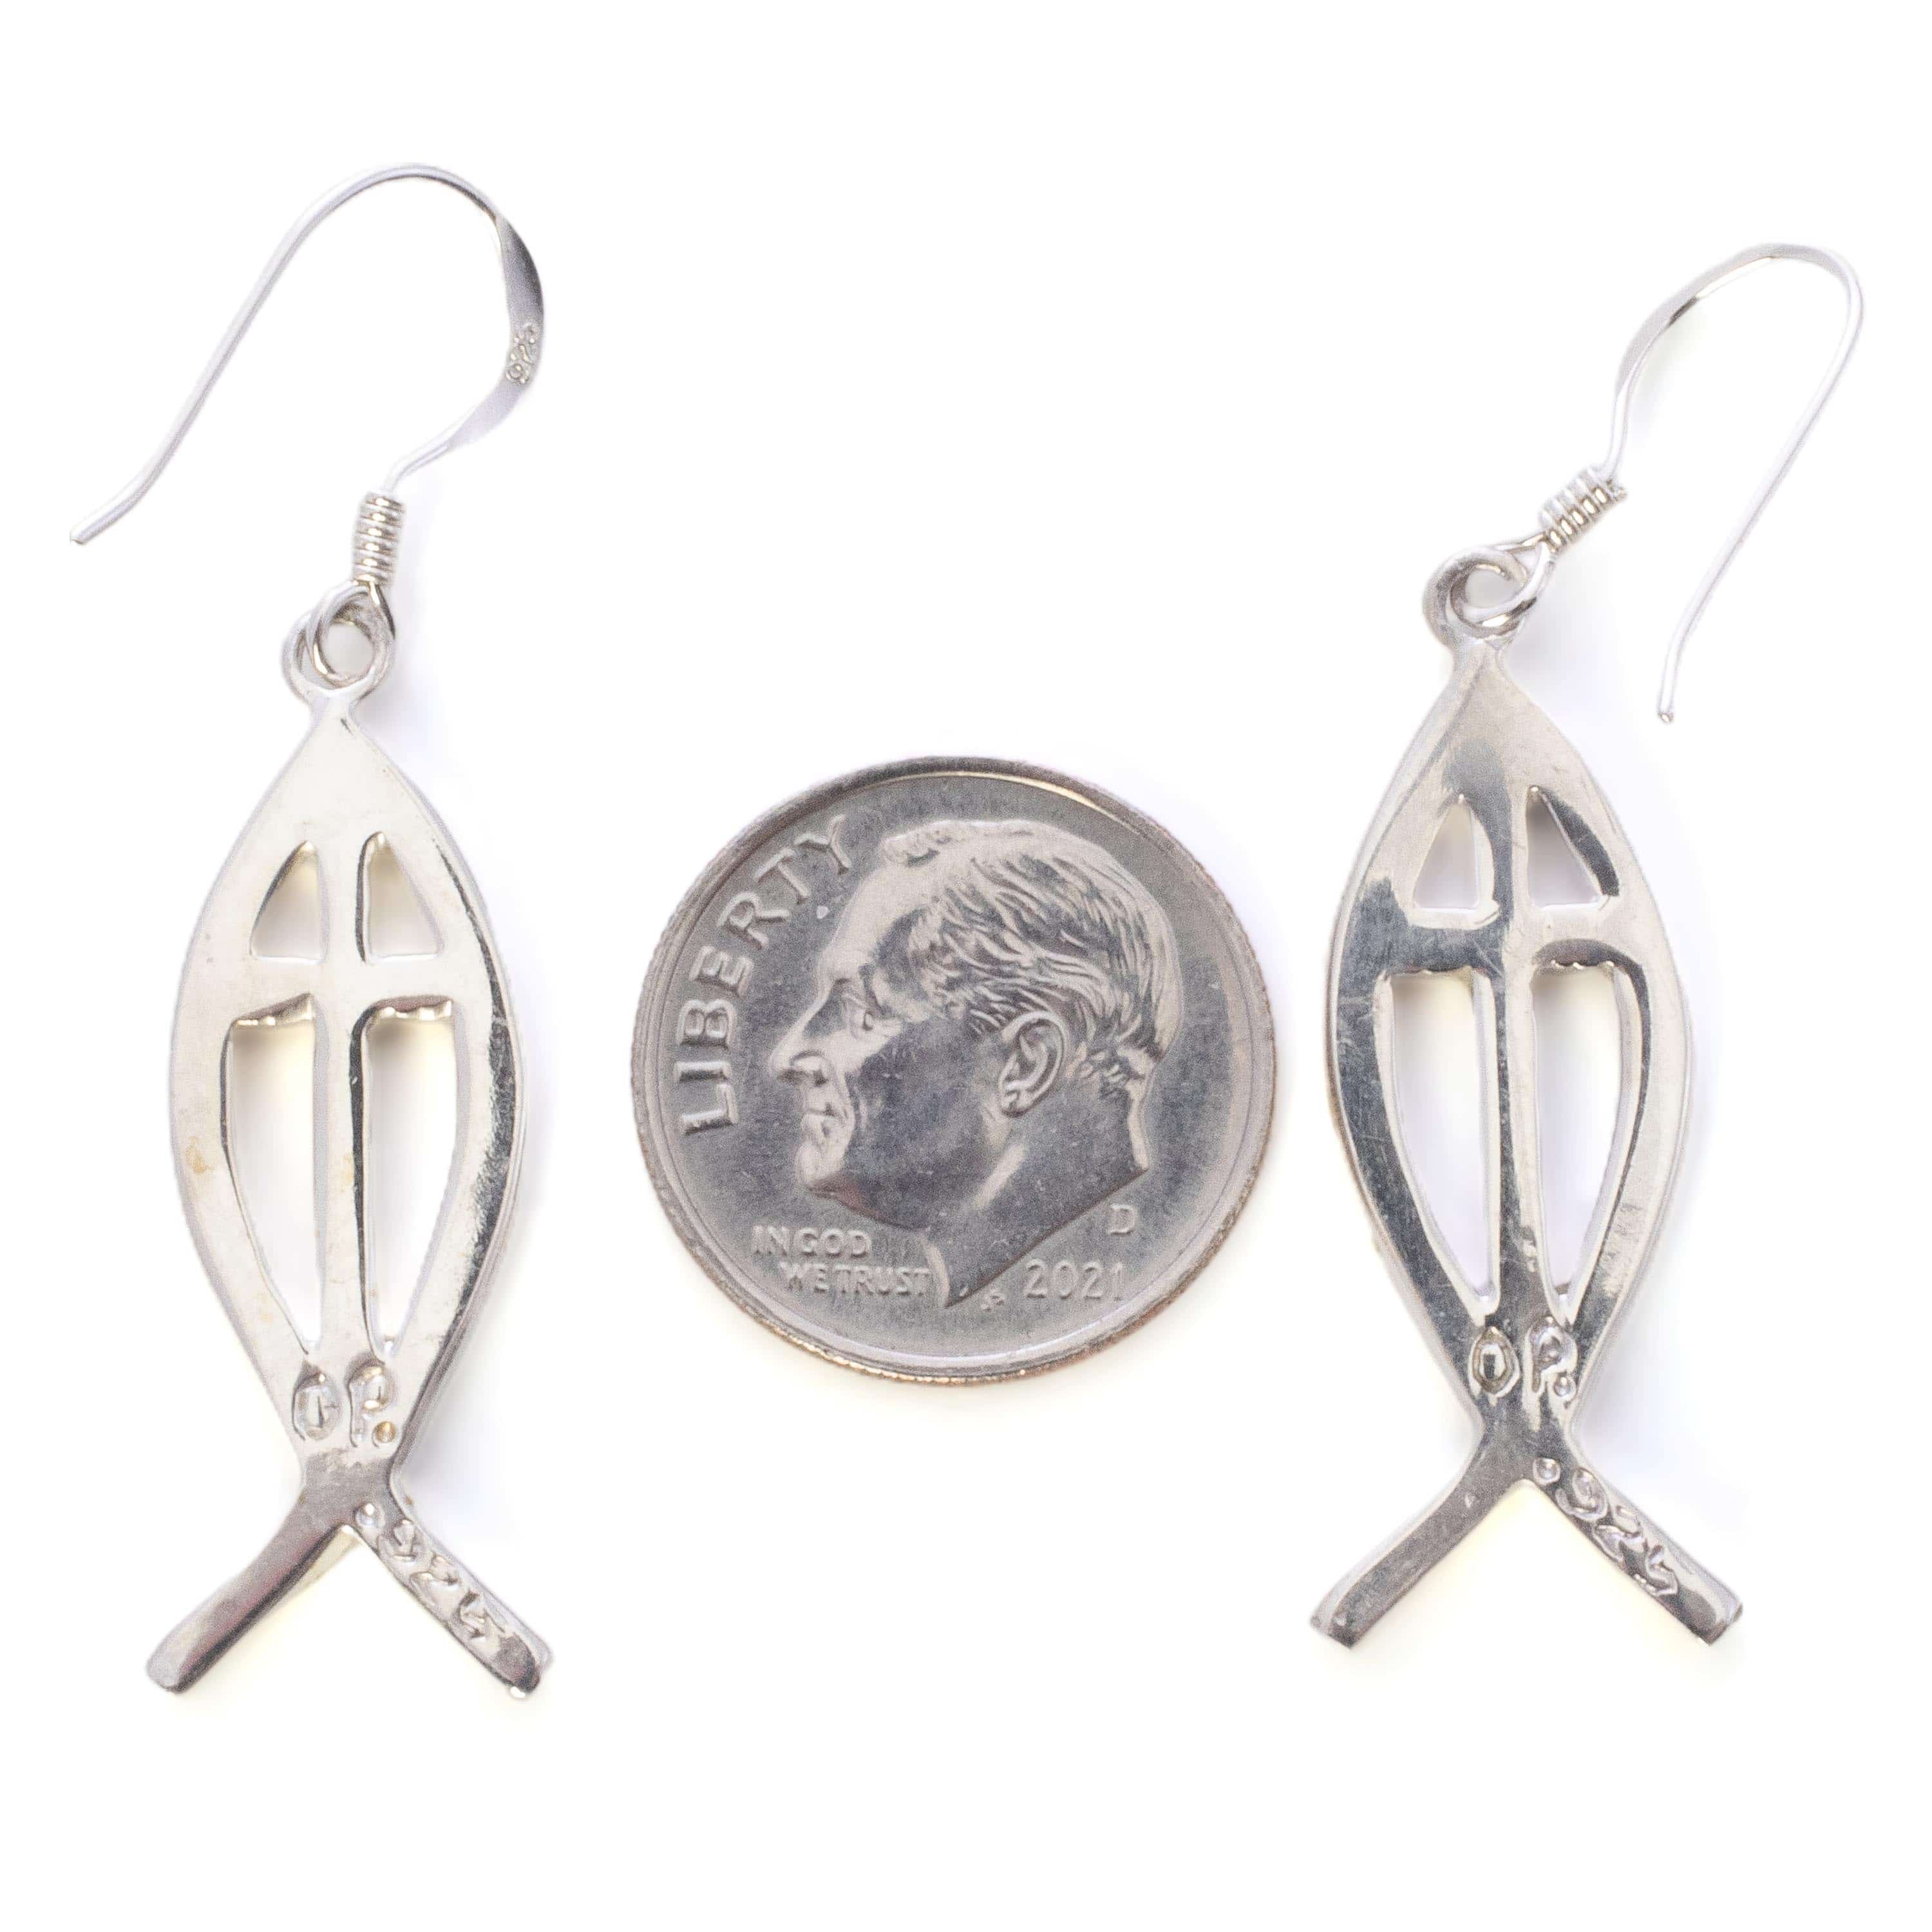 KALIFANO Southwest Silver Jewelry Multi Gemstone Fish Sterling Silver Earrings with French Hook USA Handmade with Opal Accent NME.2325.MT